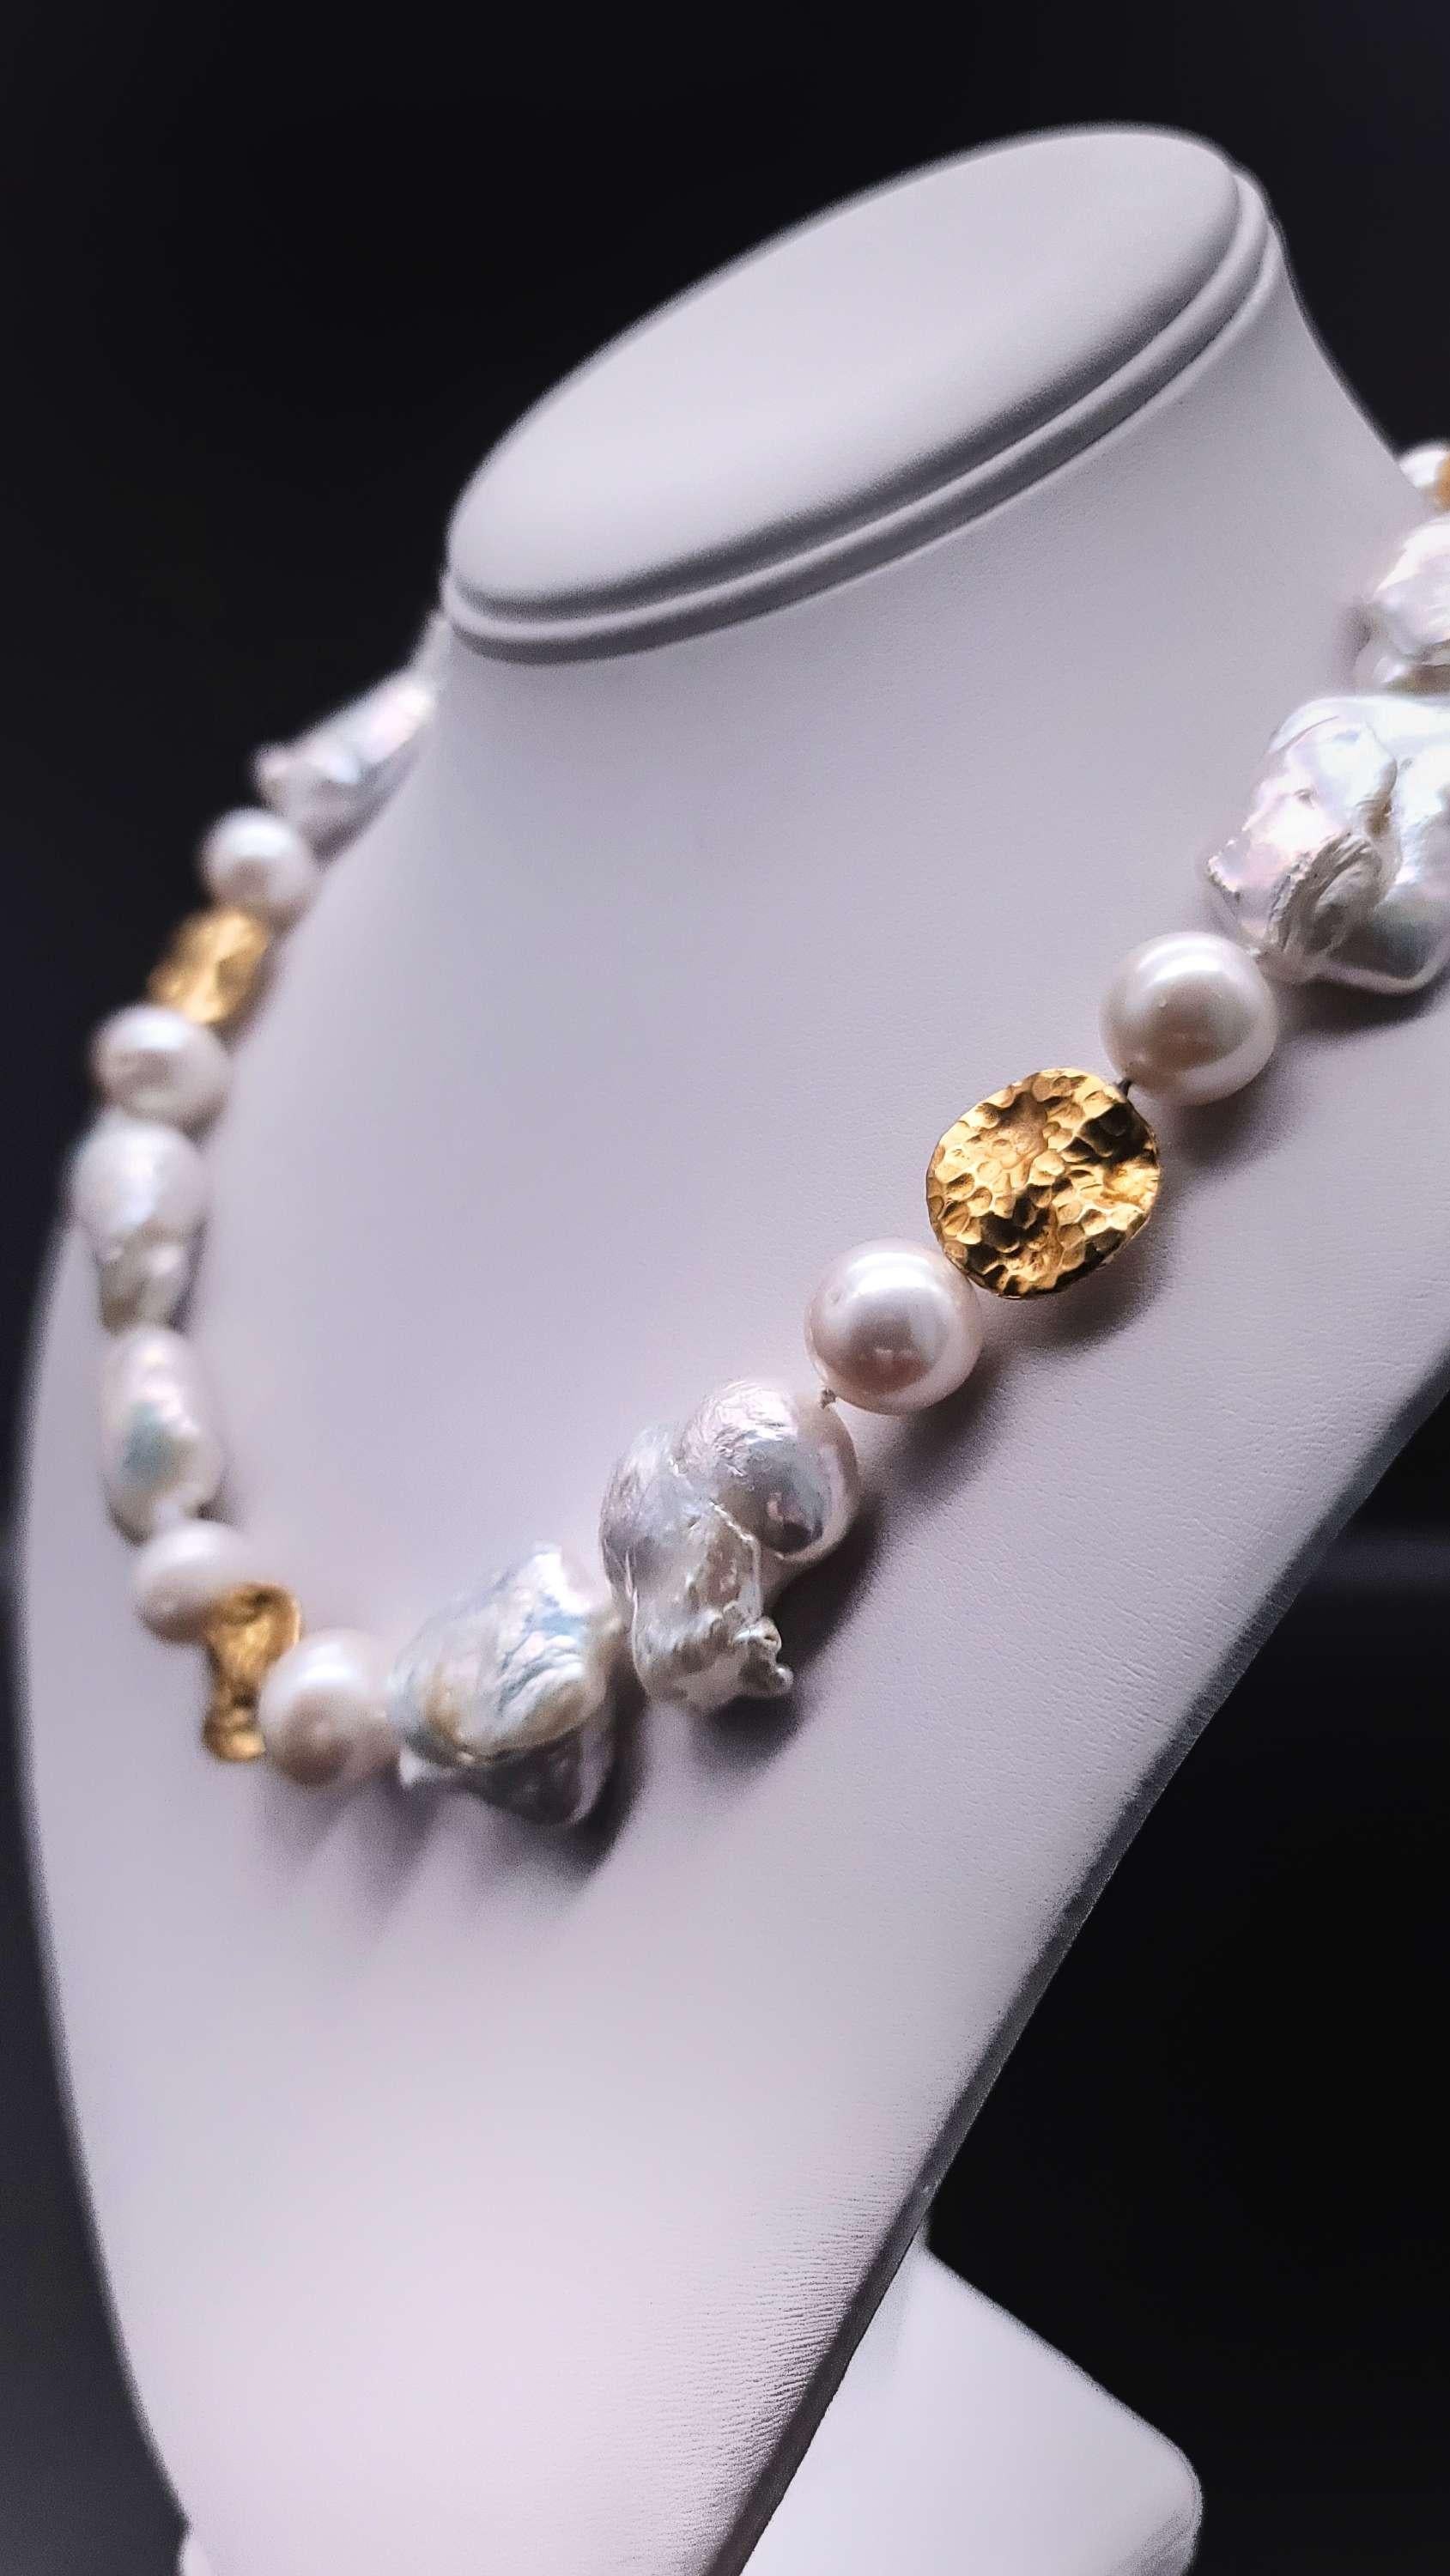 Mixed Cut A.jeschel Stunning Baroque Pearl Necklace. For Sale